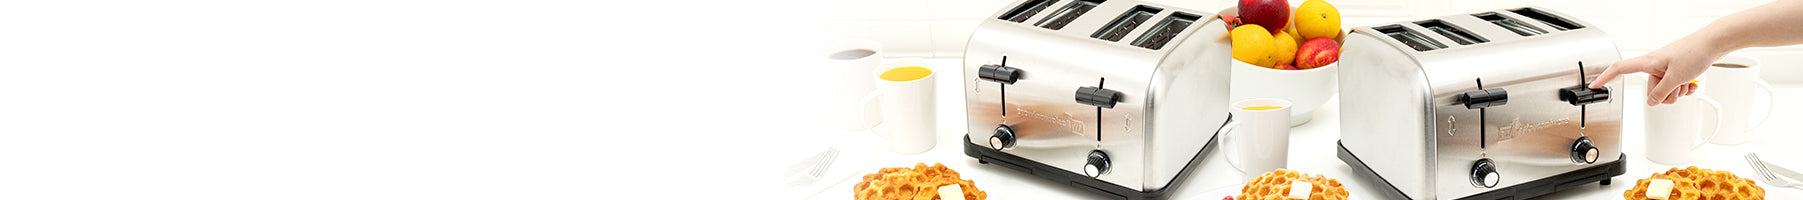 Banner_Equipment_Toasters_454